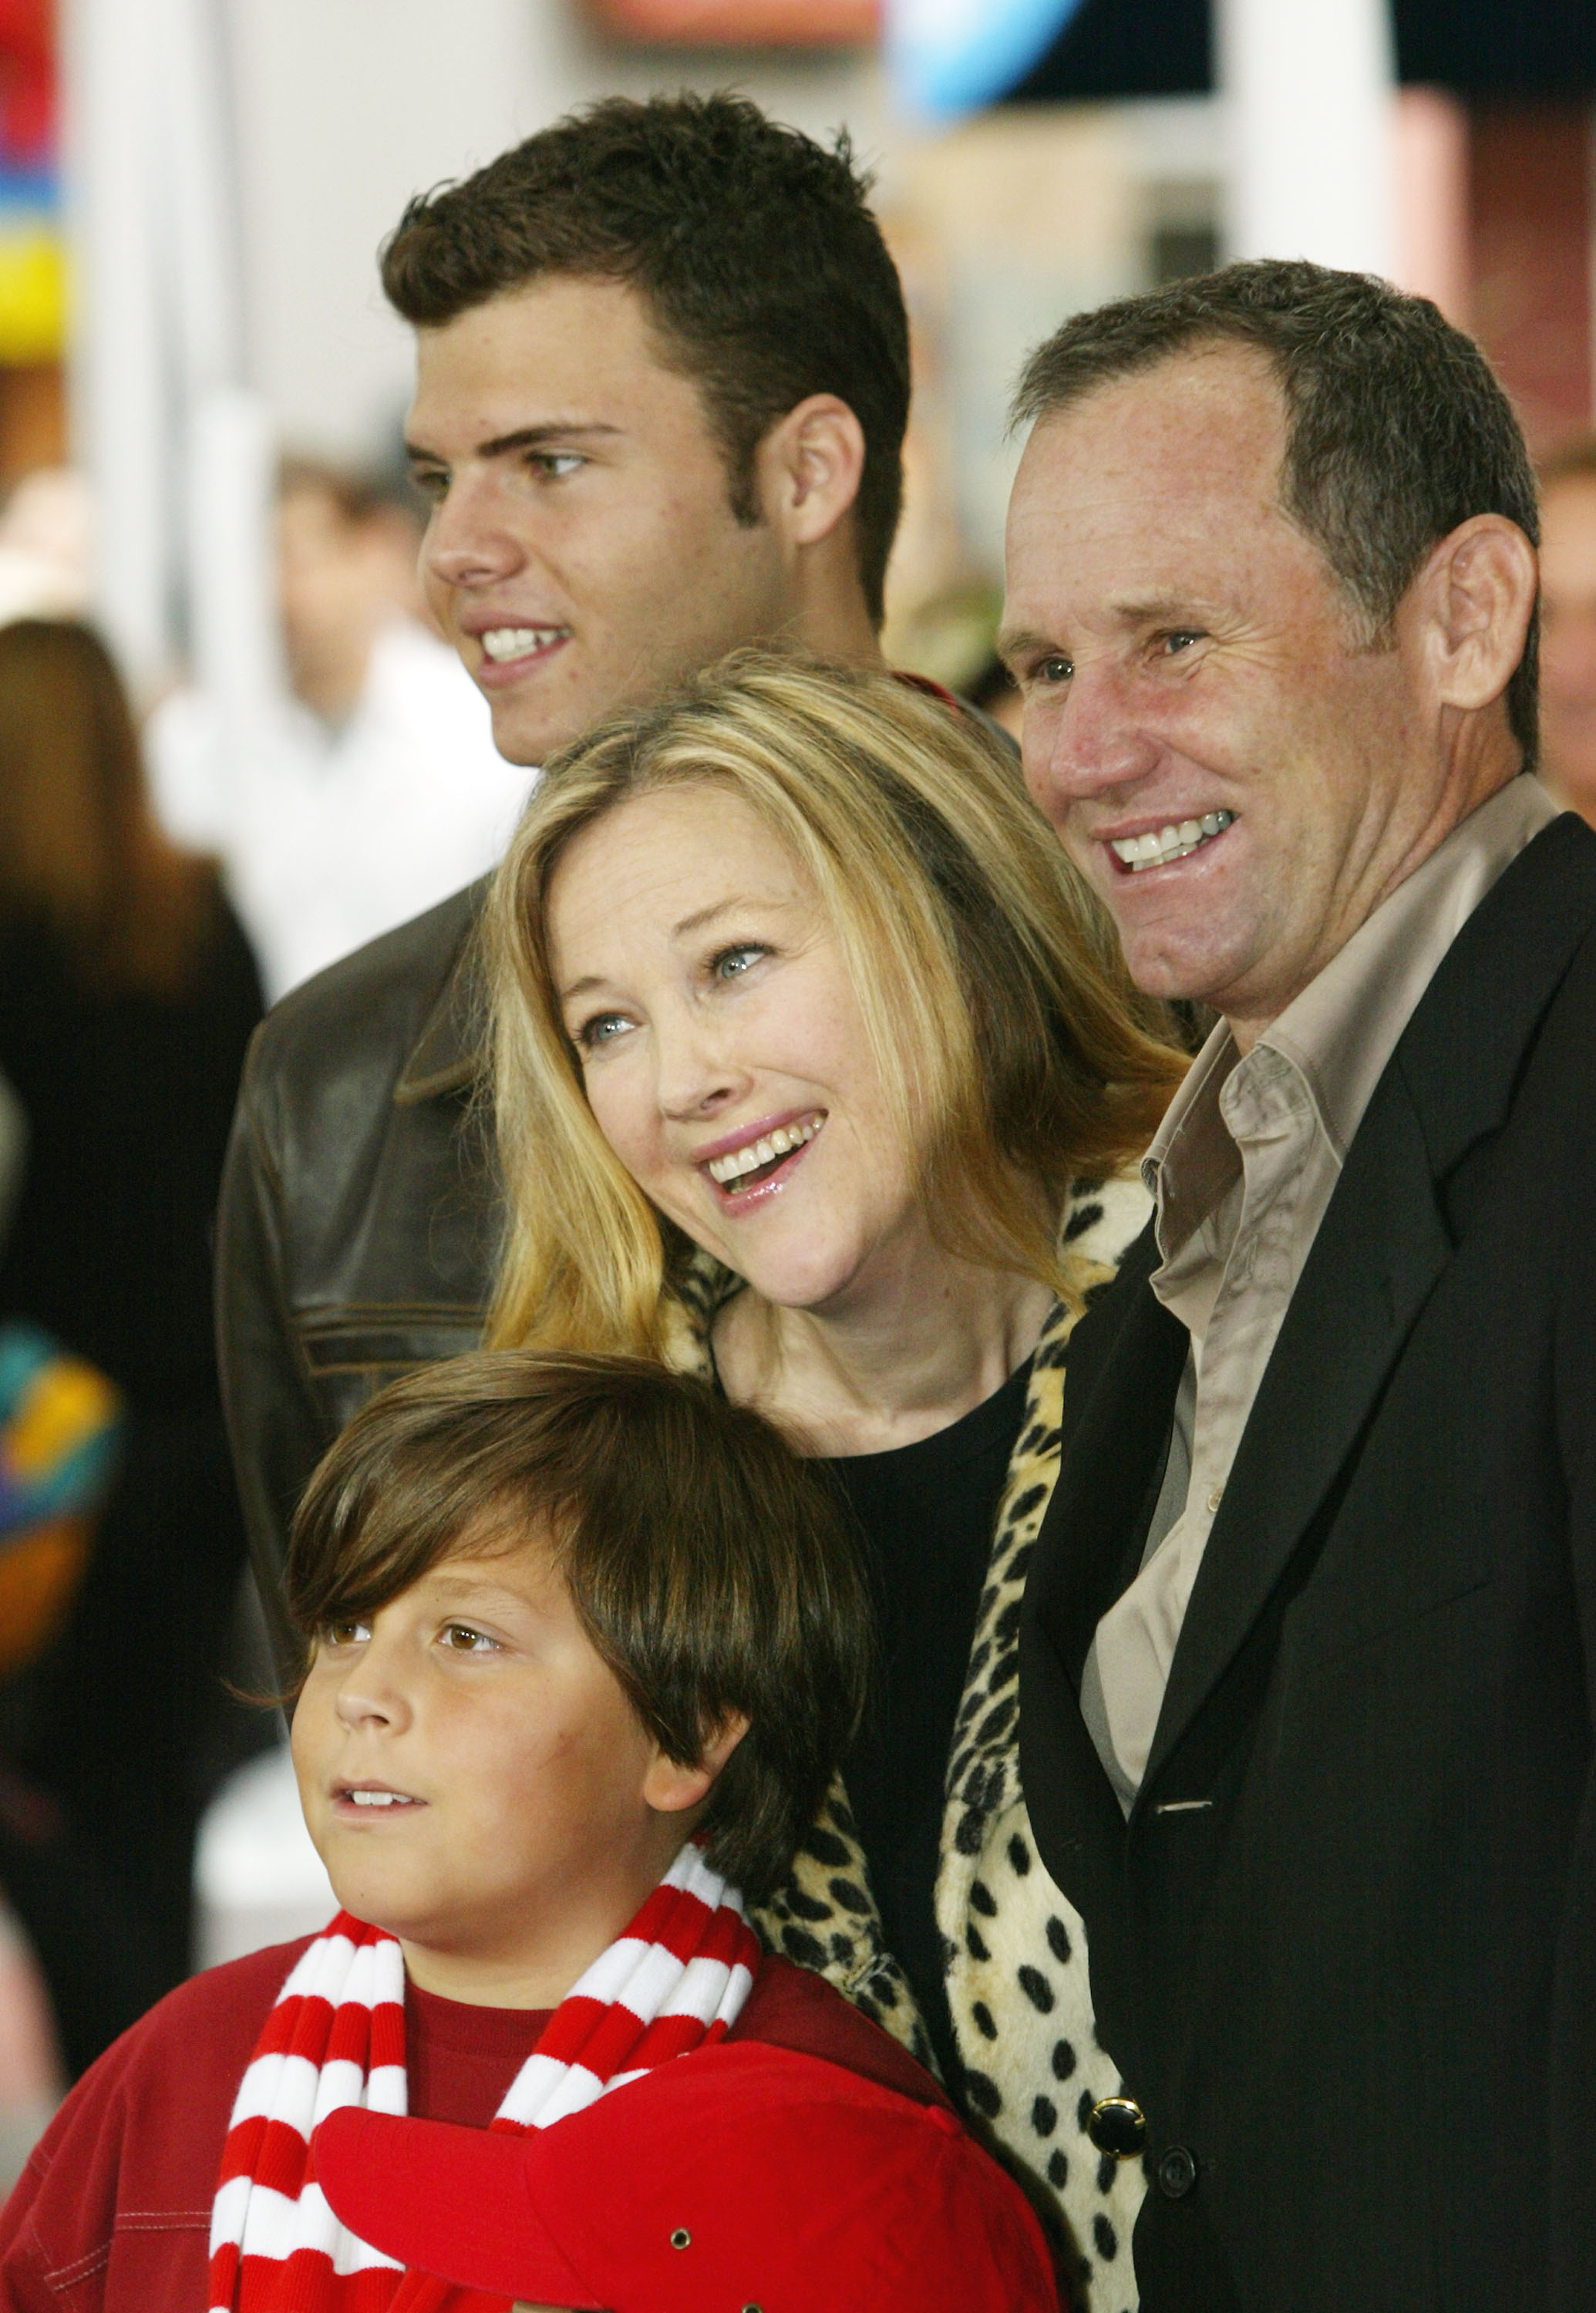 Bo Welch, Catherine O'Hara and their children Luke and Matthew attend the World Premiere of "Dr. Seuss' The Cat in the Hat" at Universal Studios on November 8, 2003 in Hollywood, California | Source: Getty Images